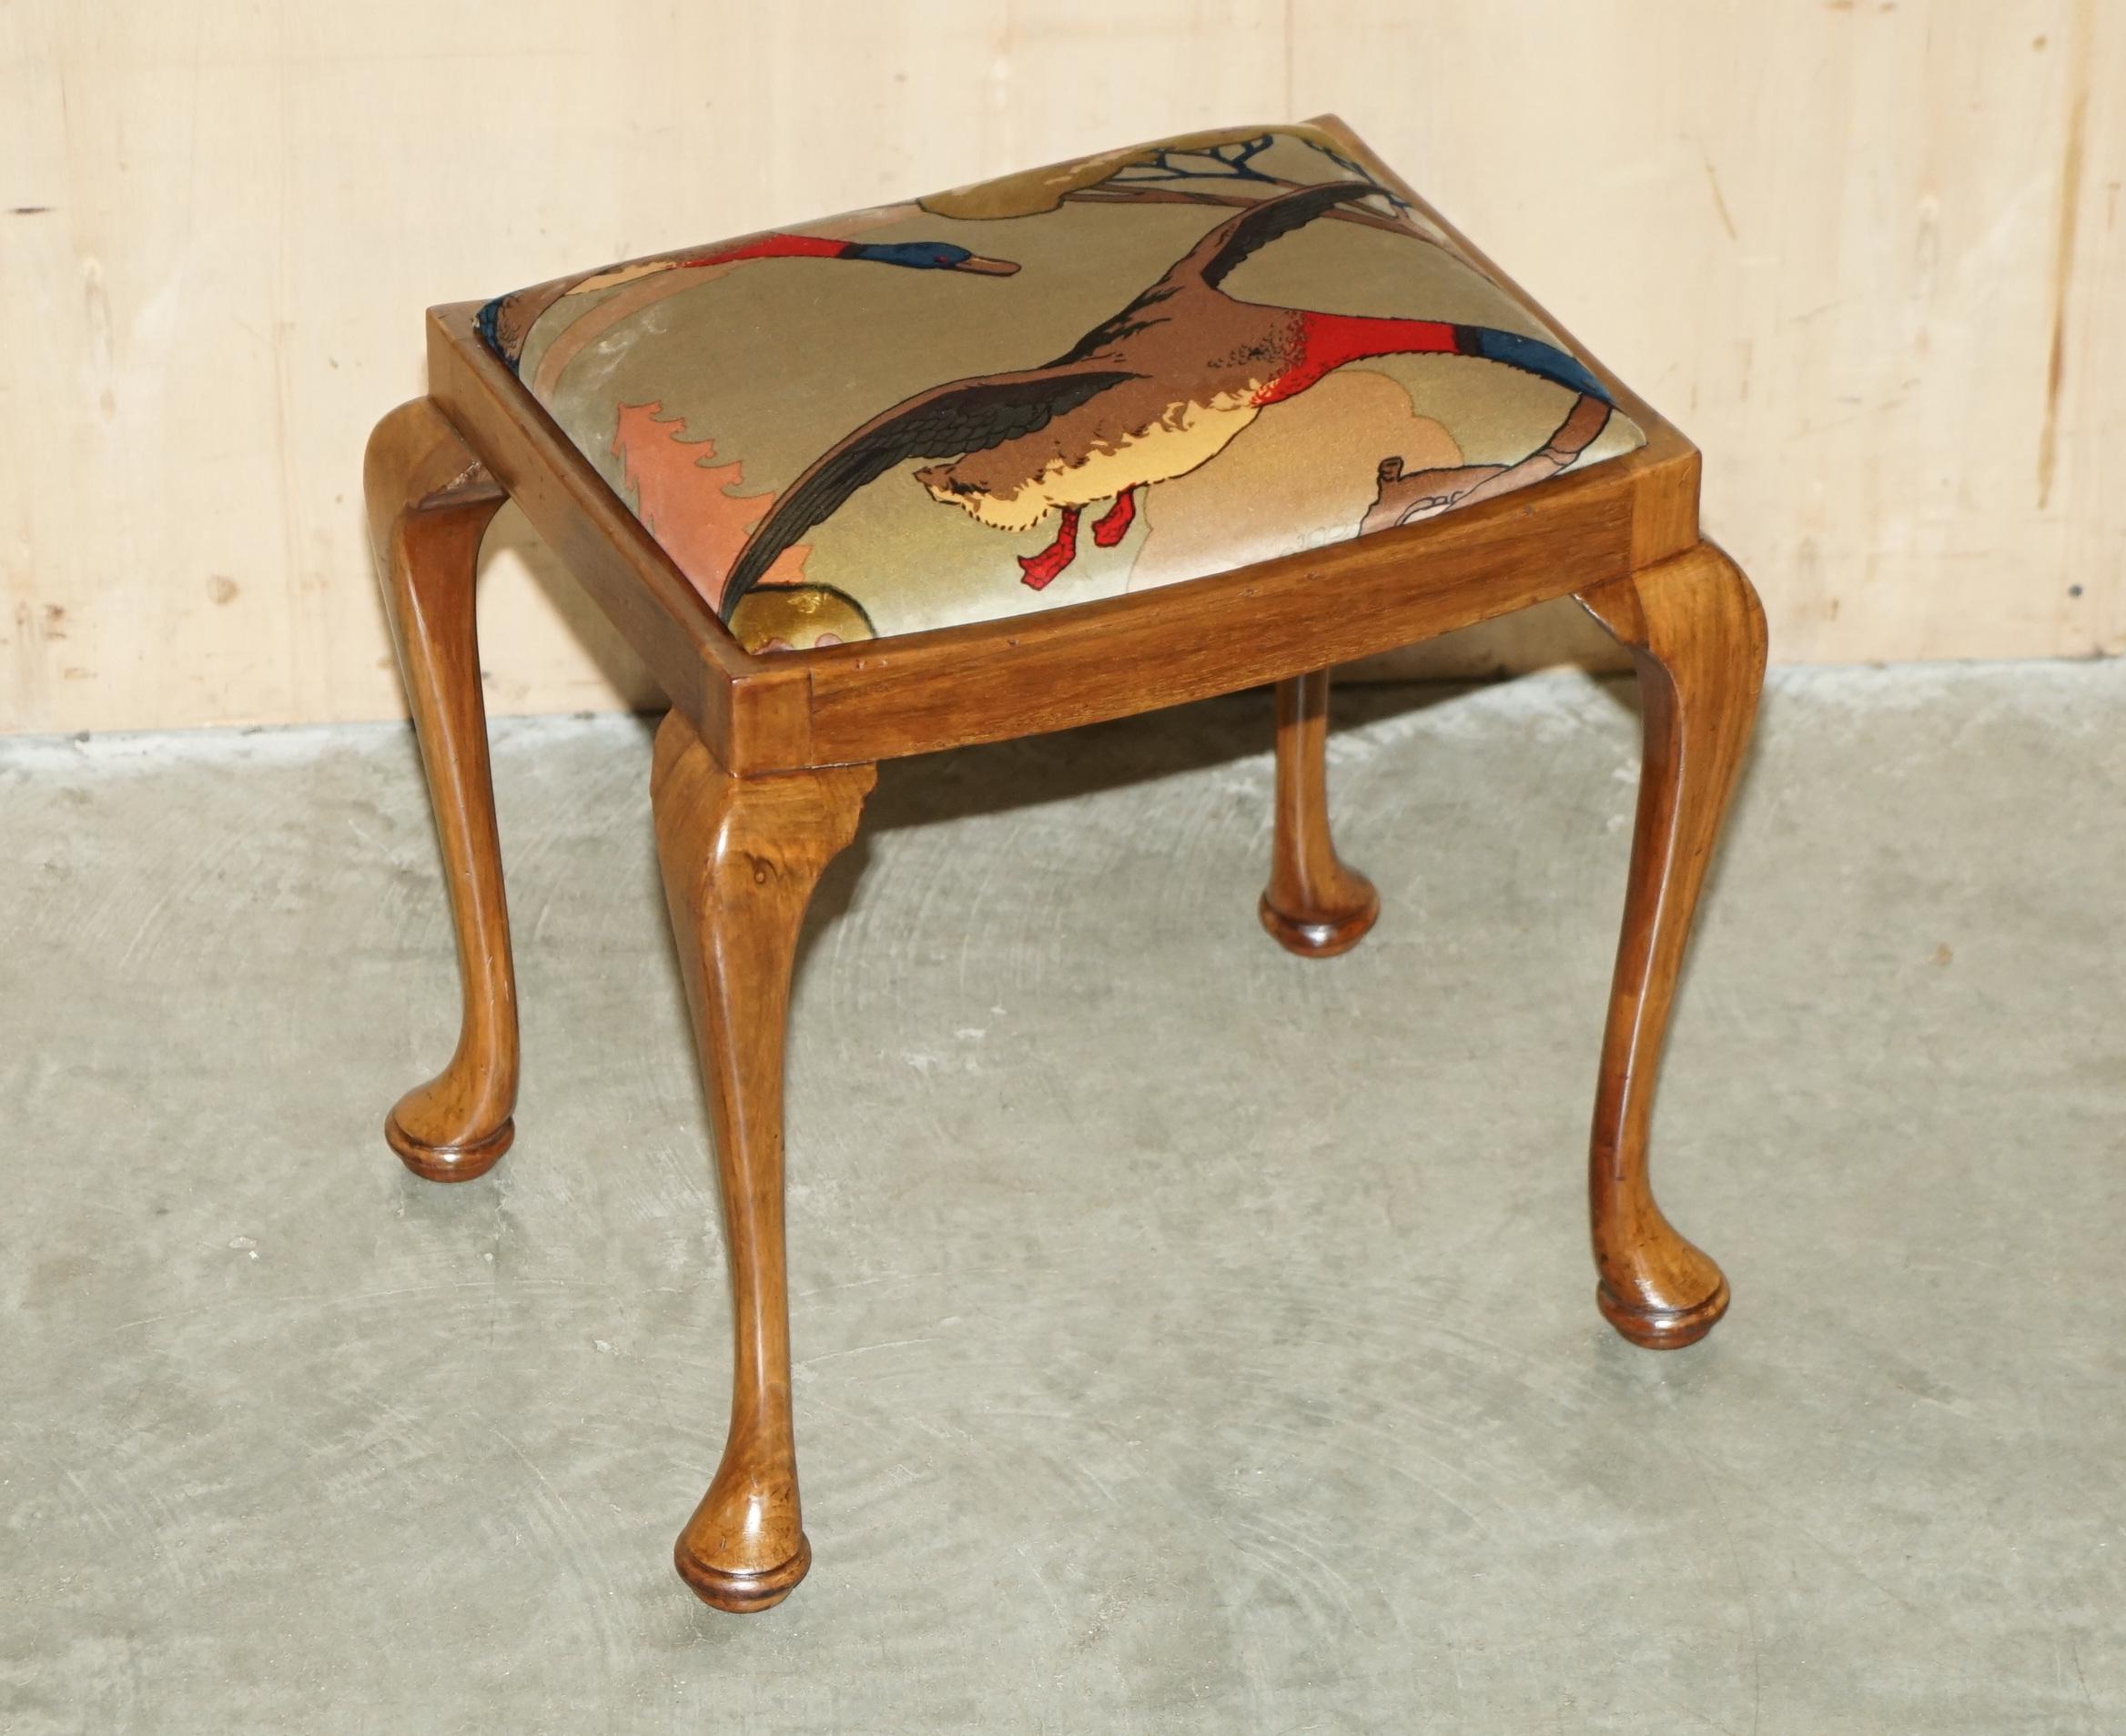 Royal House Antiques

Royal House Antiques is delighted to offer for sale this stunning circa 1930's English Walnut dressing table stool newly upholstered in Mulberry Flying Ducks Velvet fabric

Please note the delivery fee listed is just a guide,